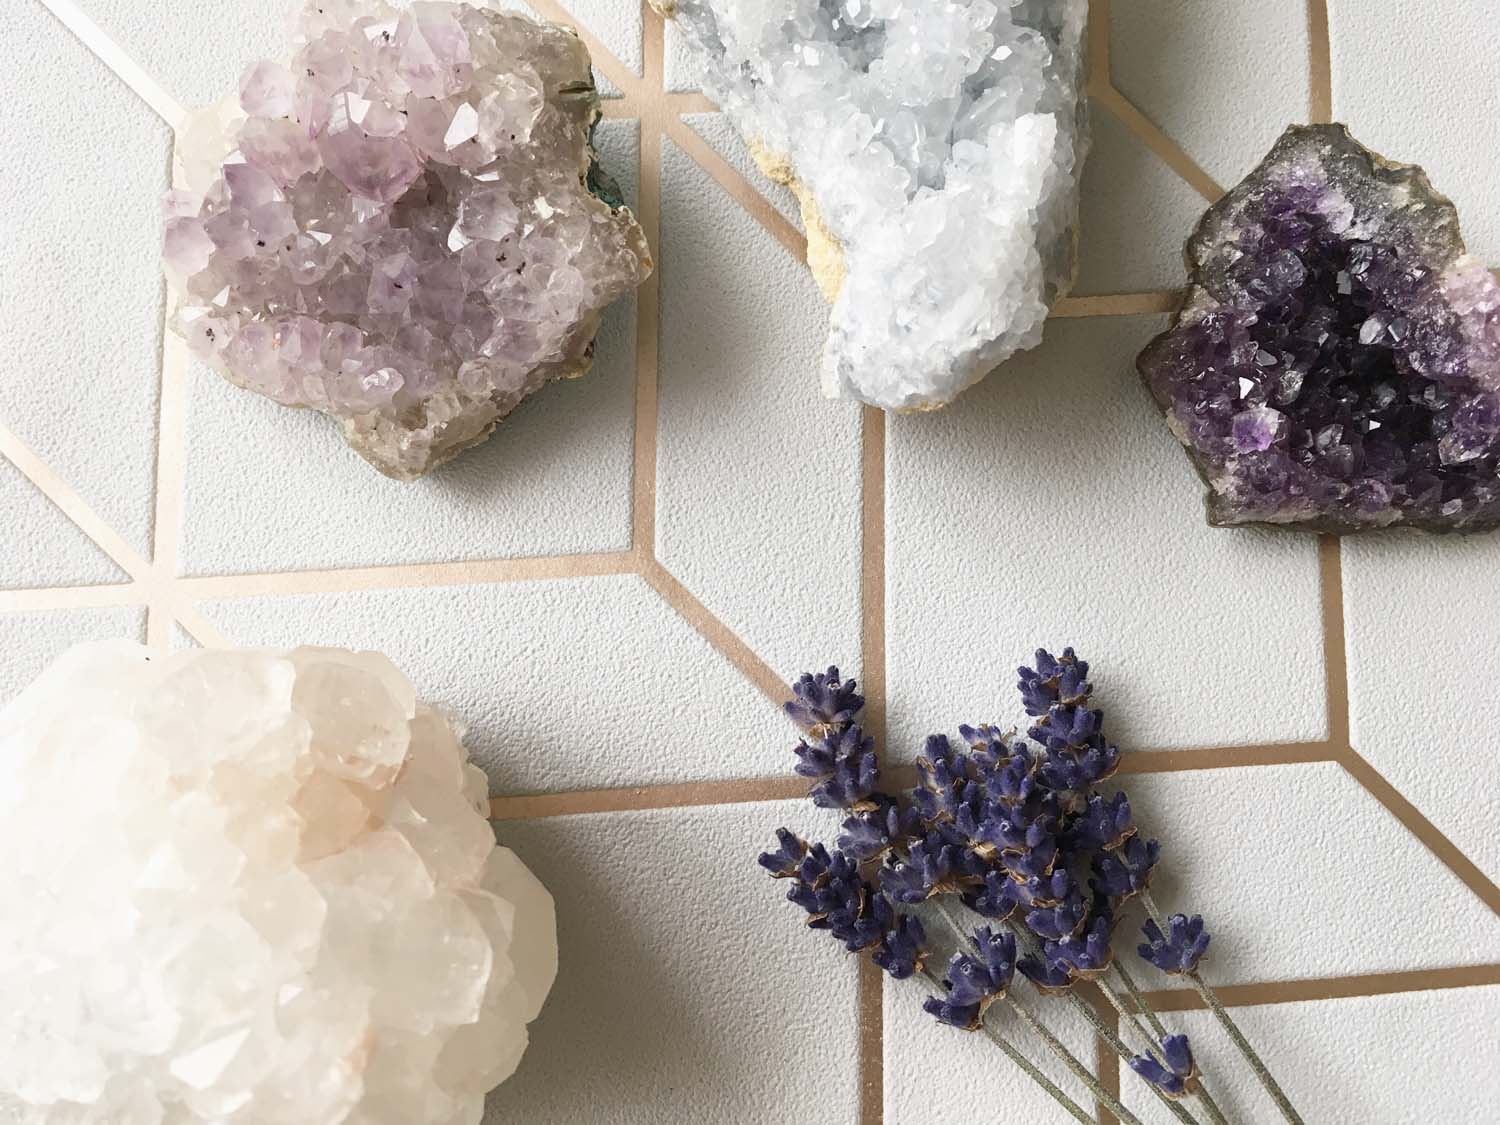 How Ethical Are Your Crystals?